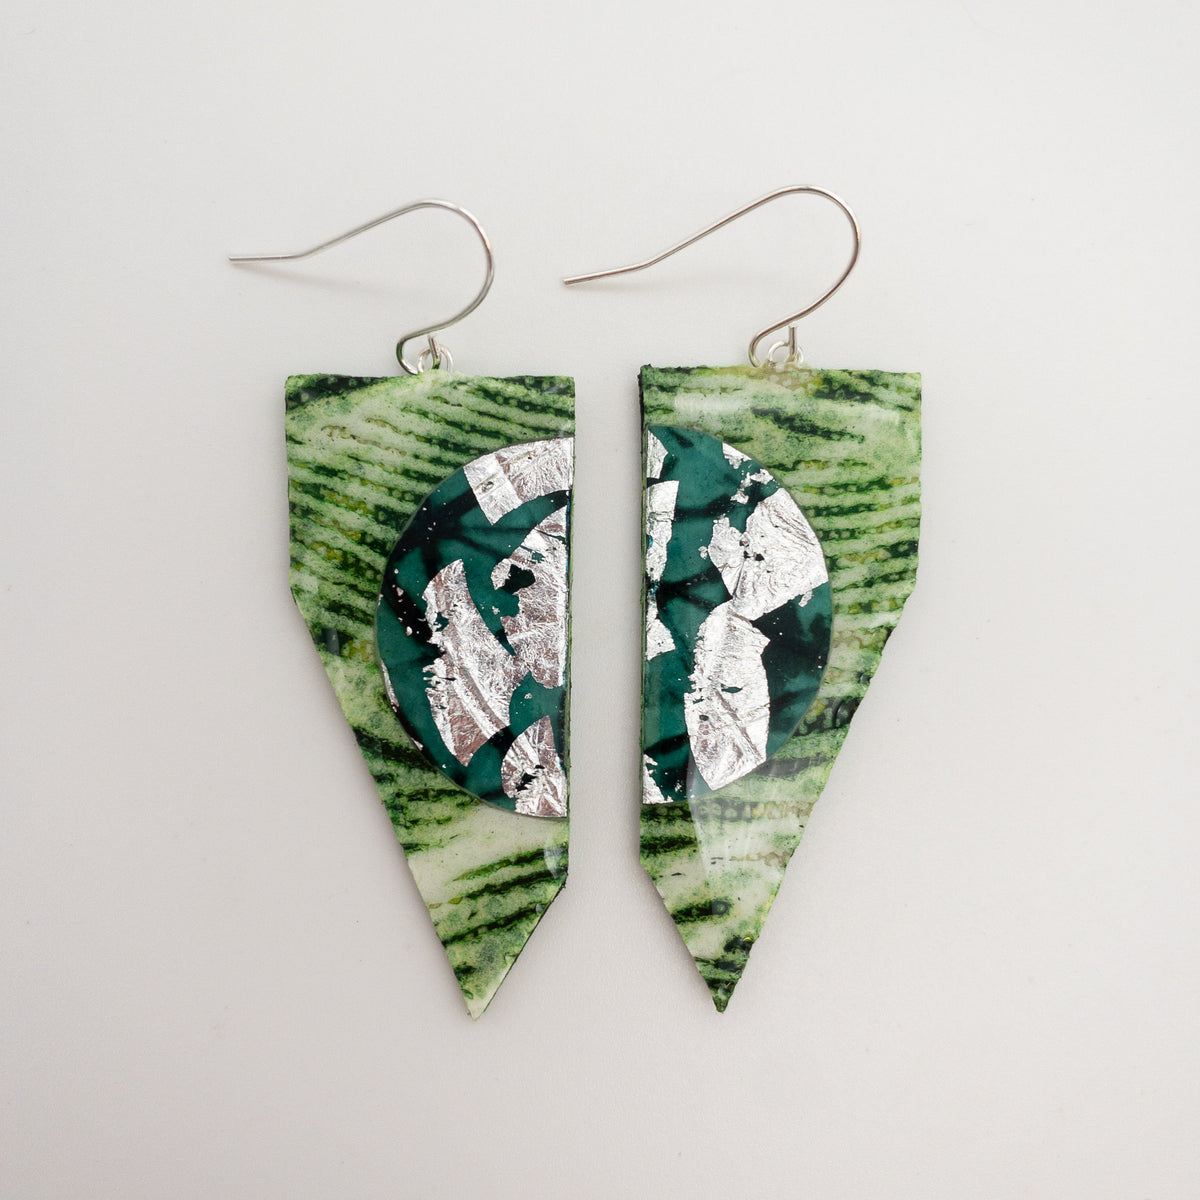 Coquette textile earrings in lime/jade/silver